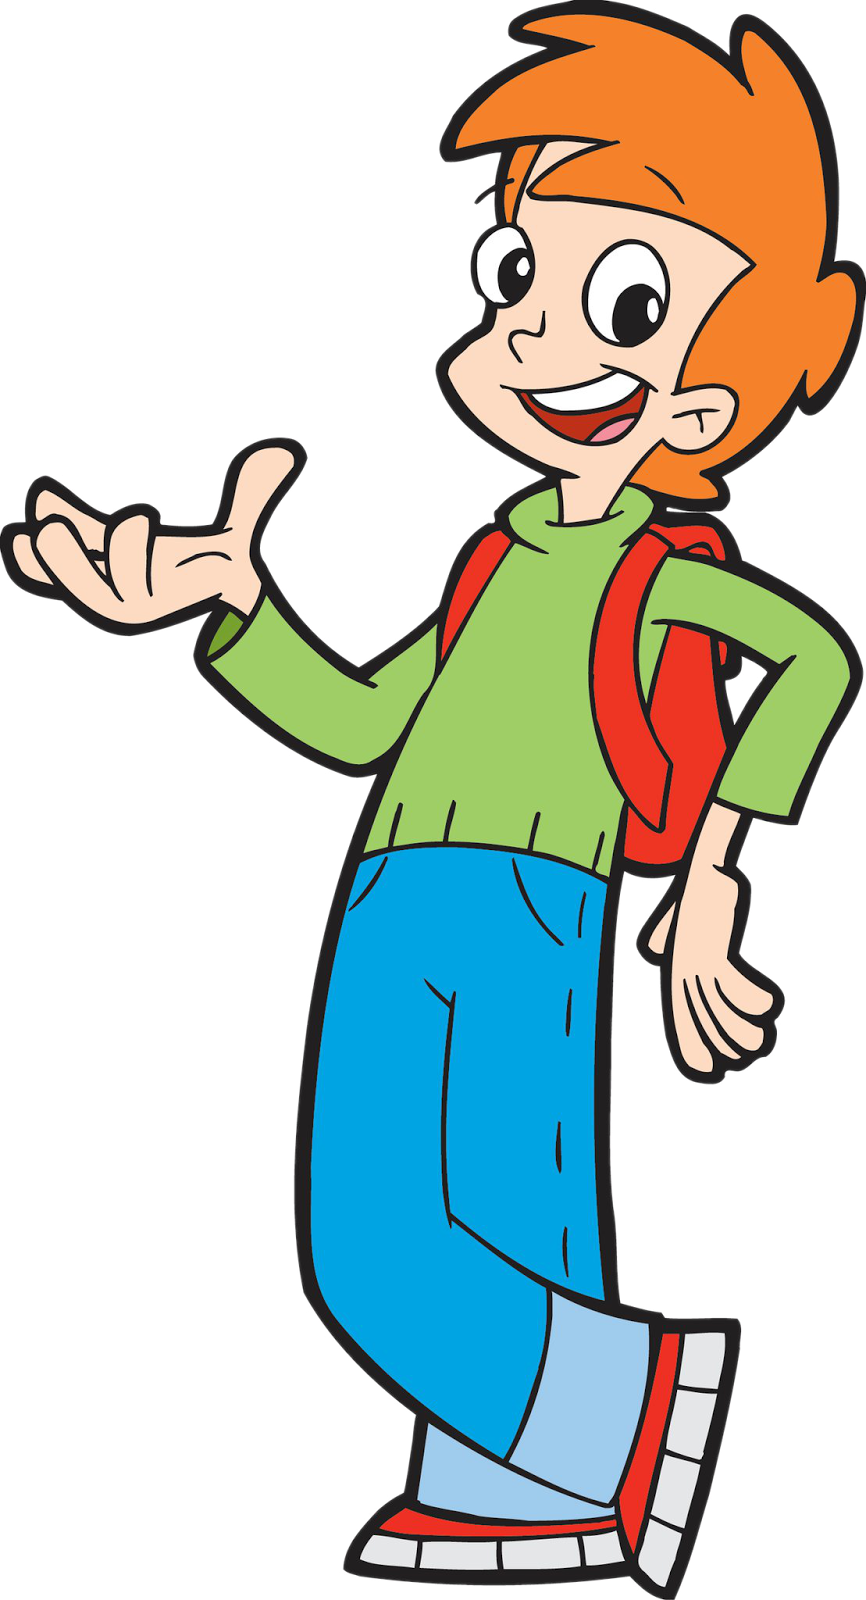 Cartoon Characters: Cyberchase